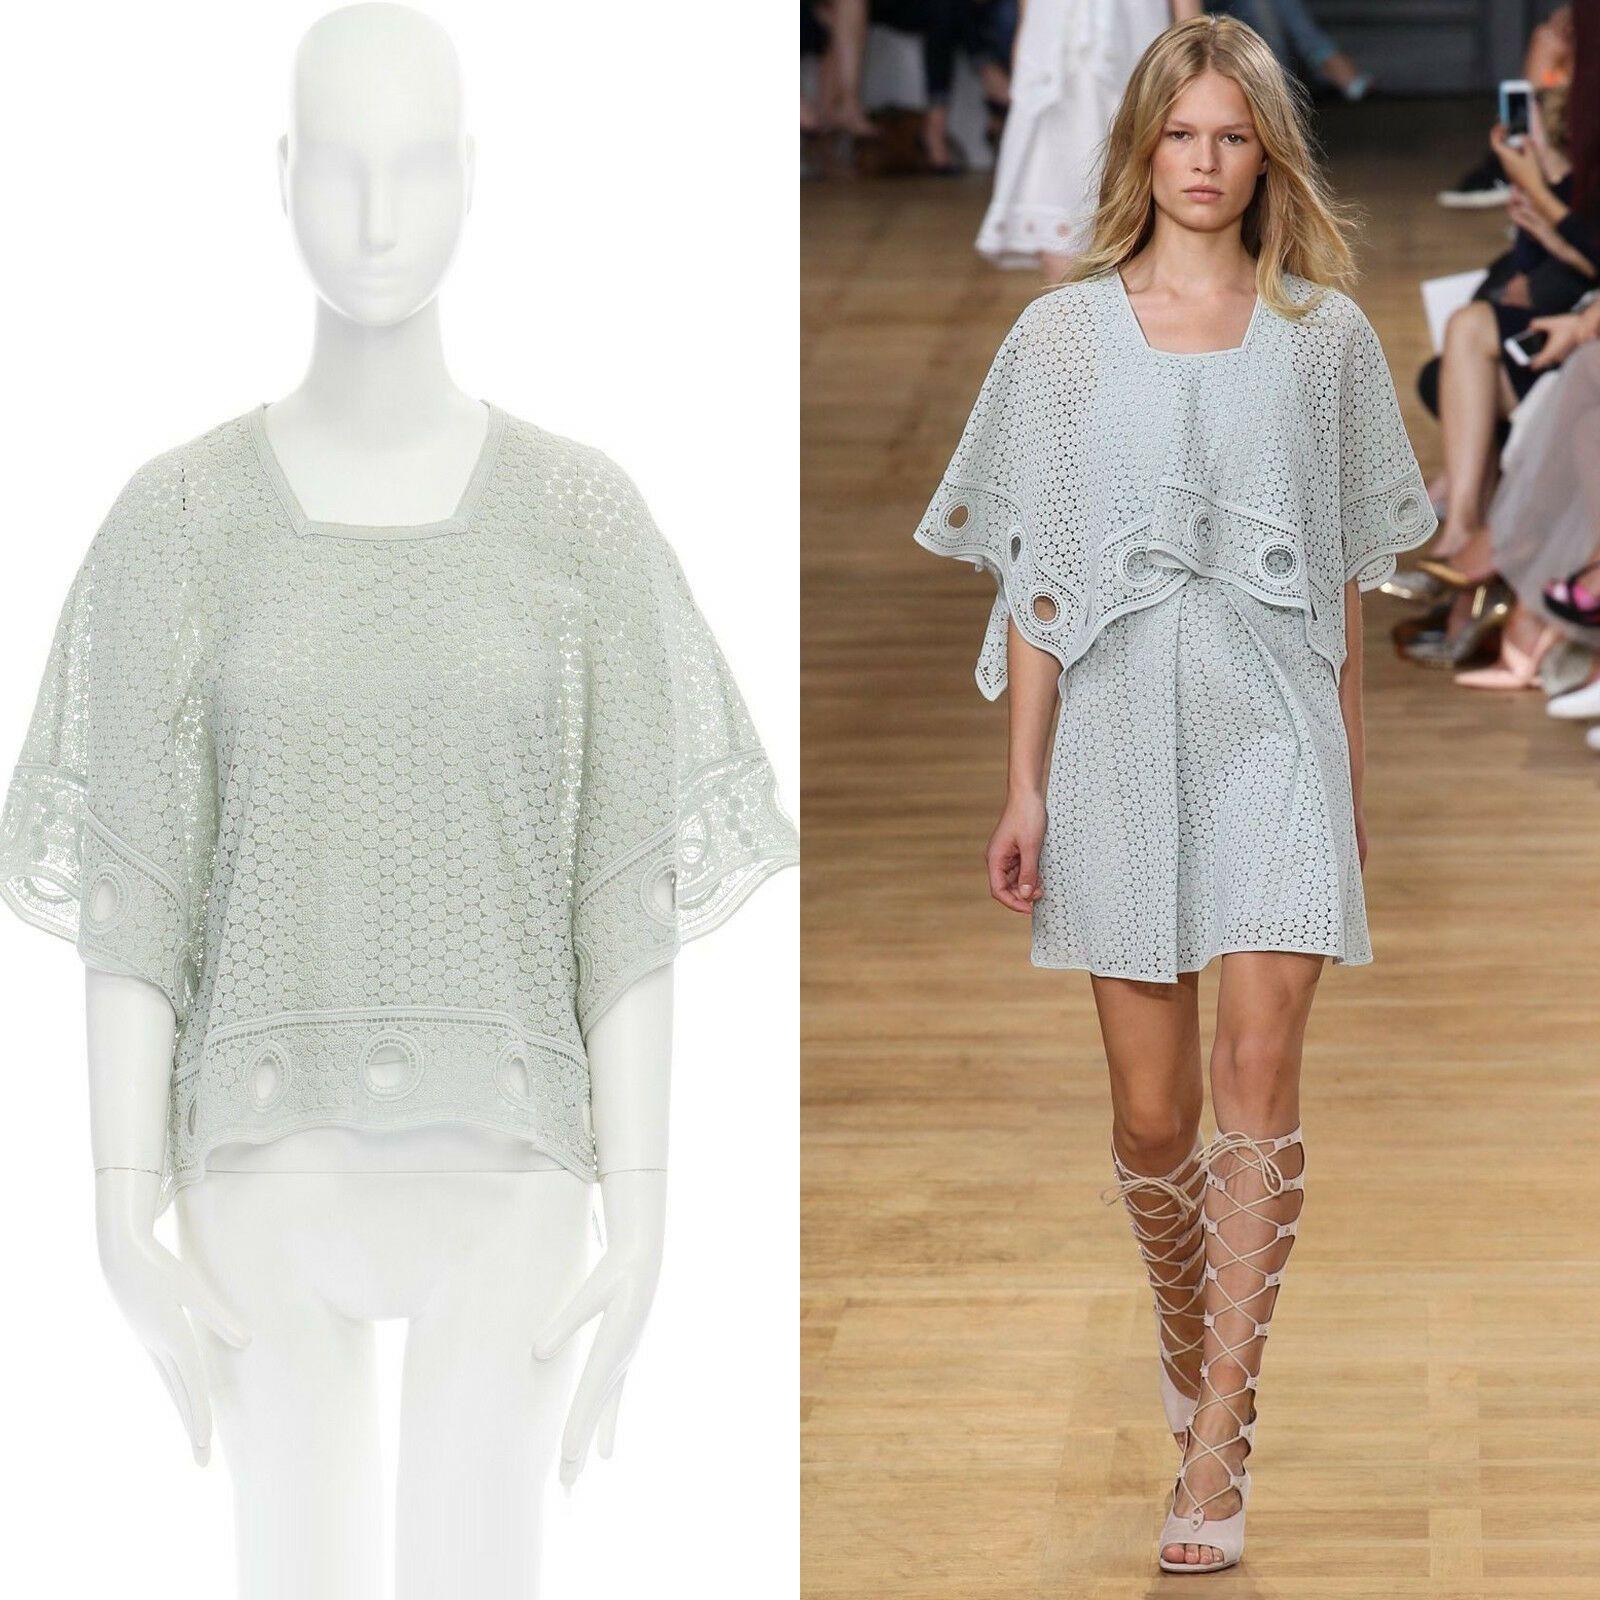 runway CHLOE SS15 teal blue crochet lace knit poncho capelet top FR36 US4 UK8 S
CHLOE
AS SEEN ON: SPRING SUMMER 2015 RUNWAY
COTTON, POLYESTER, SILK . 
TEAL BLUE . 
CROCHET KNIT .
ANGULAR NECKLINE . 
PONCHO SLEEVES . 
SLEEVELESS SILK TANK TOP .